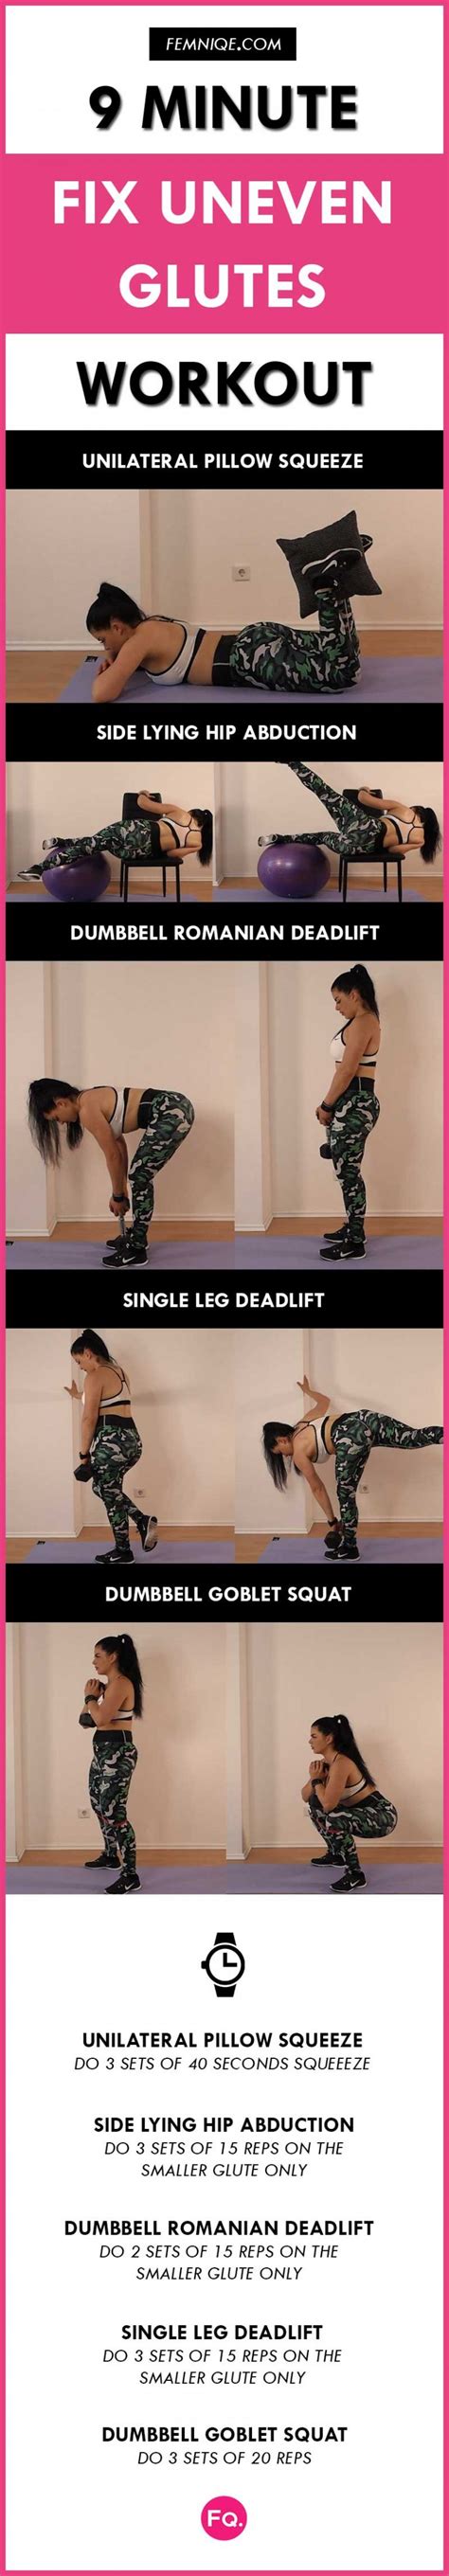 Uneven Glutes Fixer 9 Minute Workout For Glute Imbalances